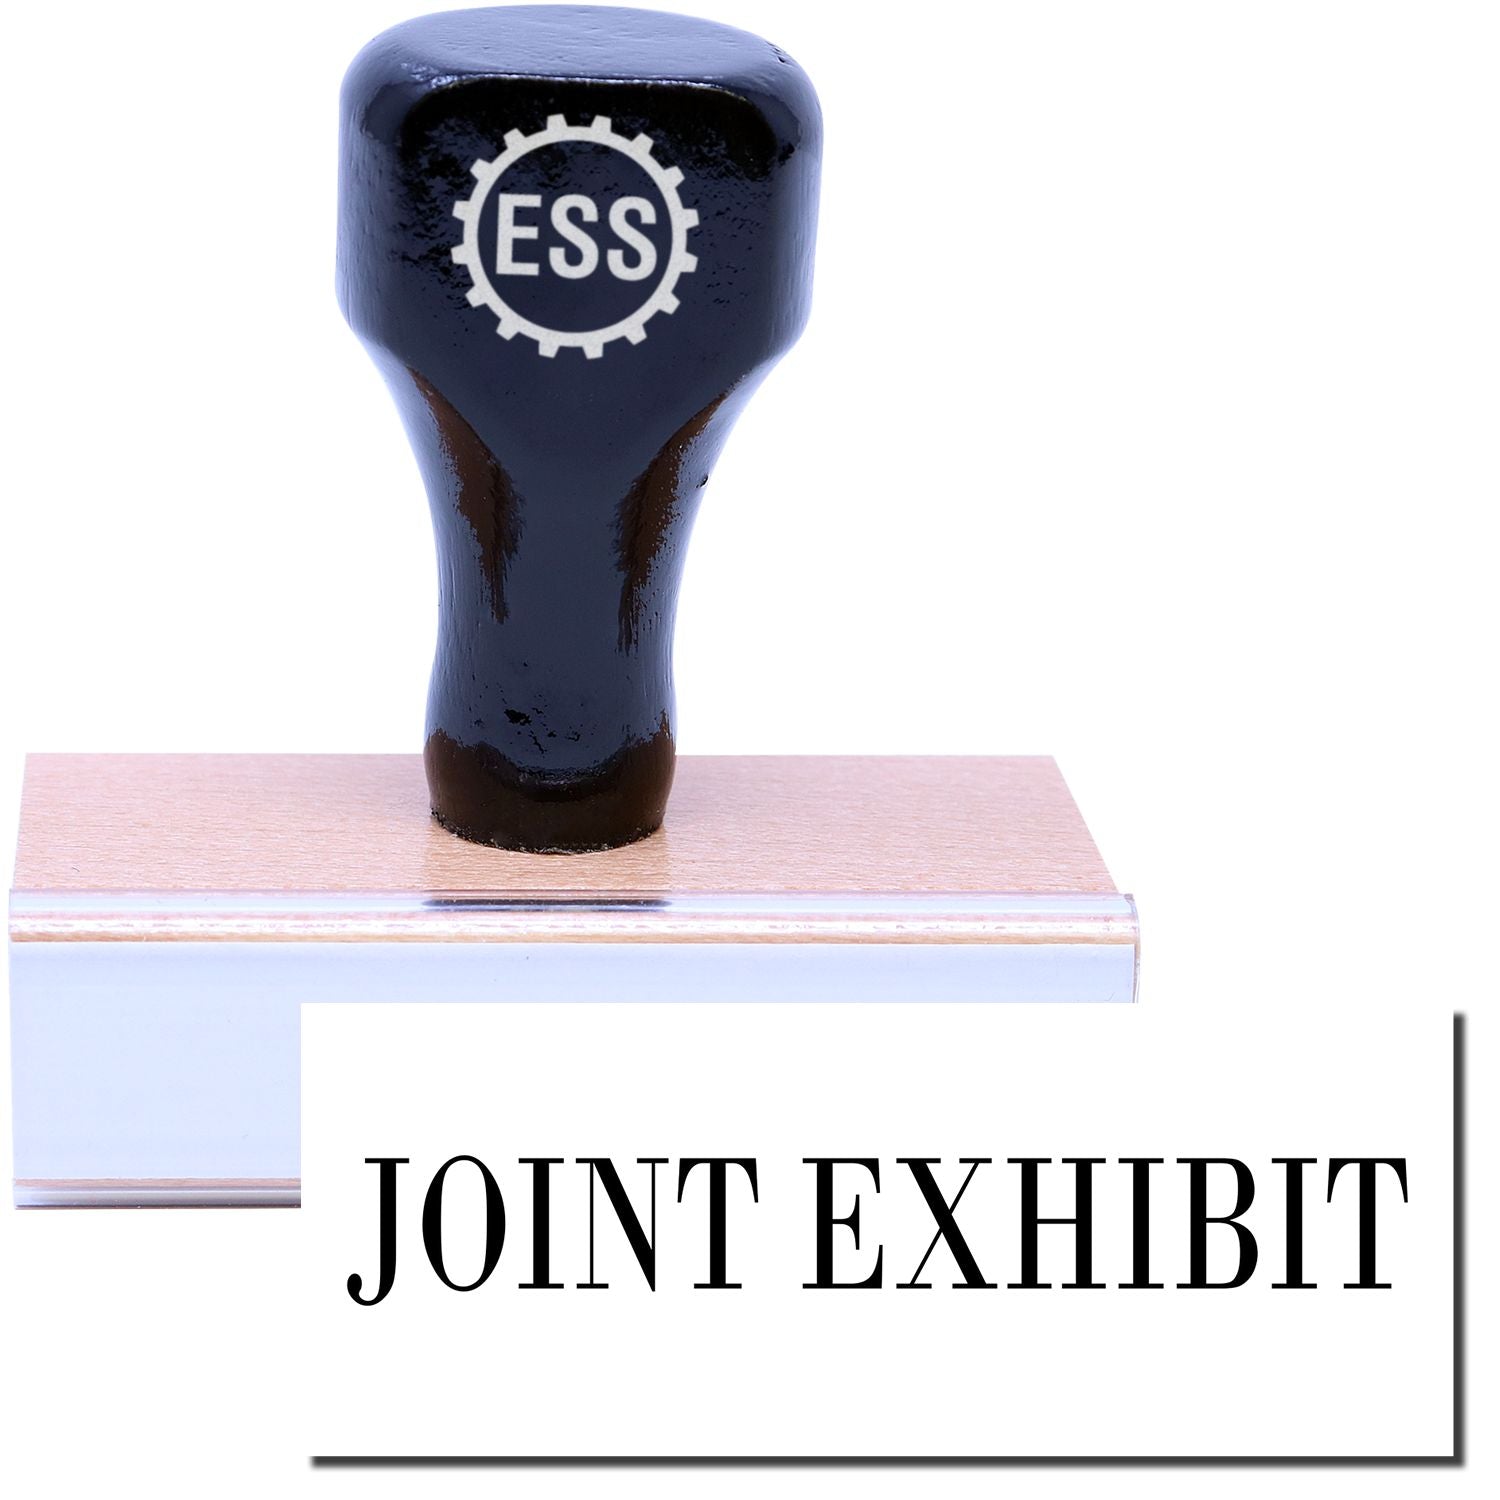 A stock office rubber stamp with a stamped image showing how the text "JOINT EXHIBIT" in a large font is displayed after stamping.